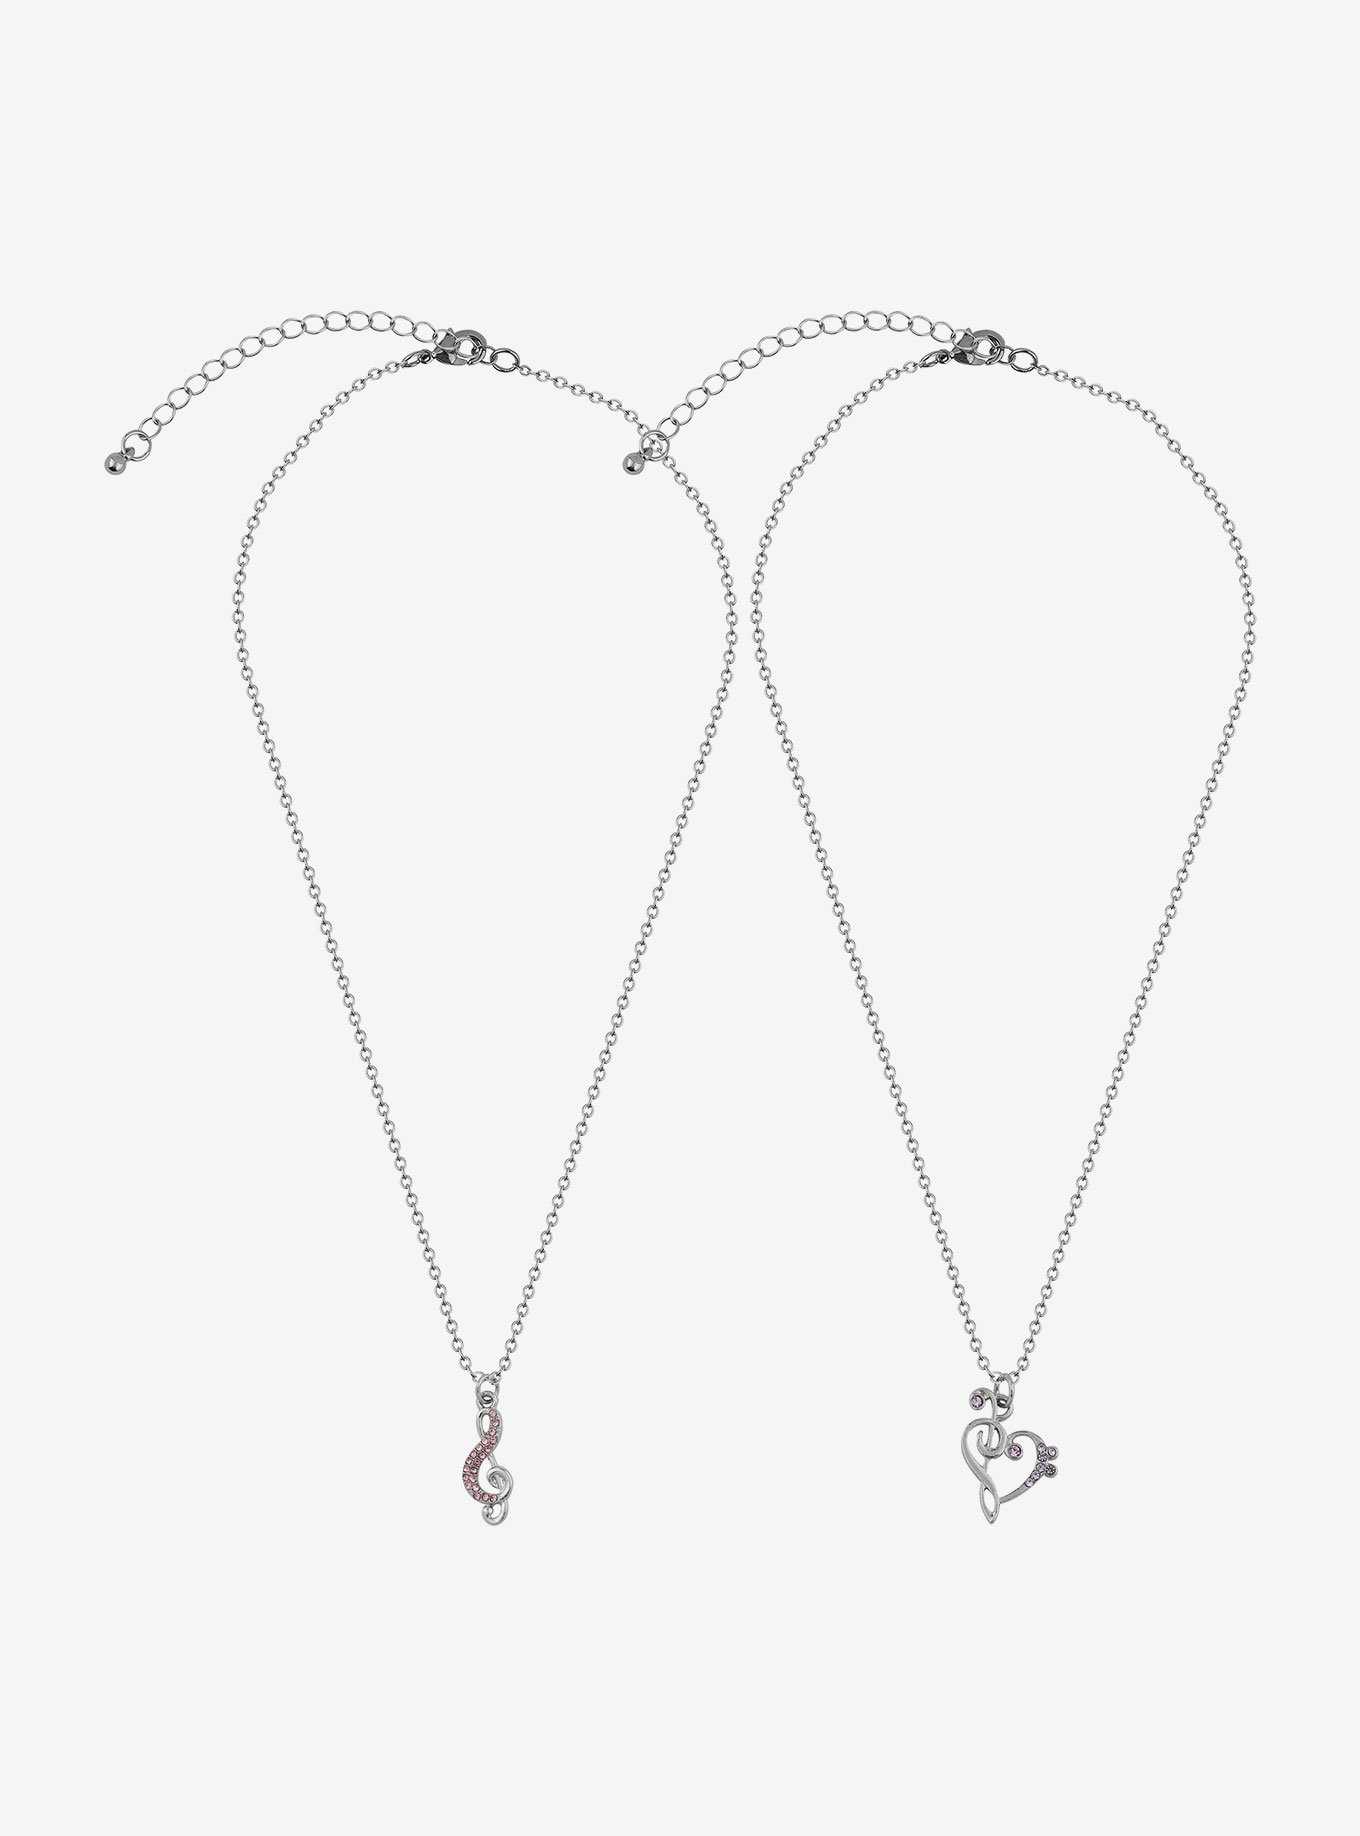 Sweet Society Bejeweled Music Note Best Friend Necklace Set, , hi-res